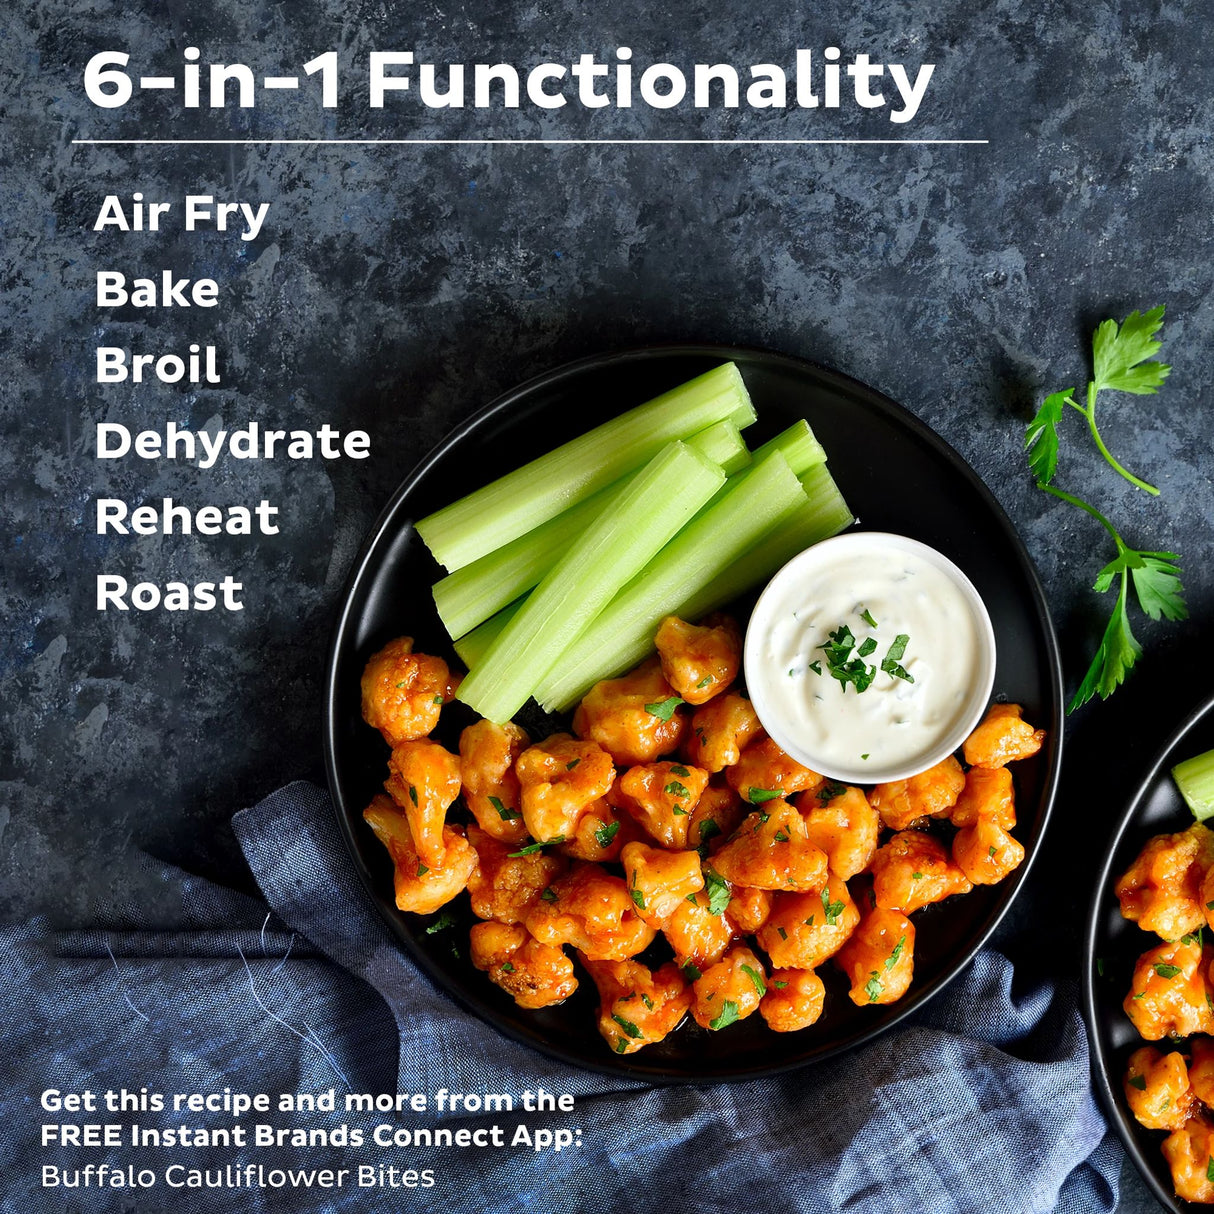  Instant™ Vortex™ Plus 4-quart Air Fryer with text 6 in 1 Functionality